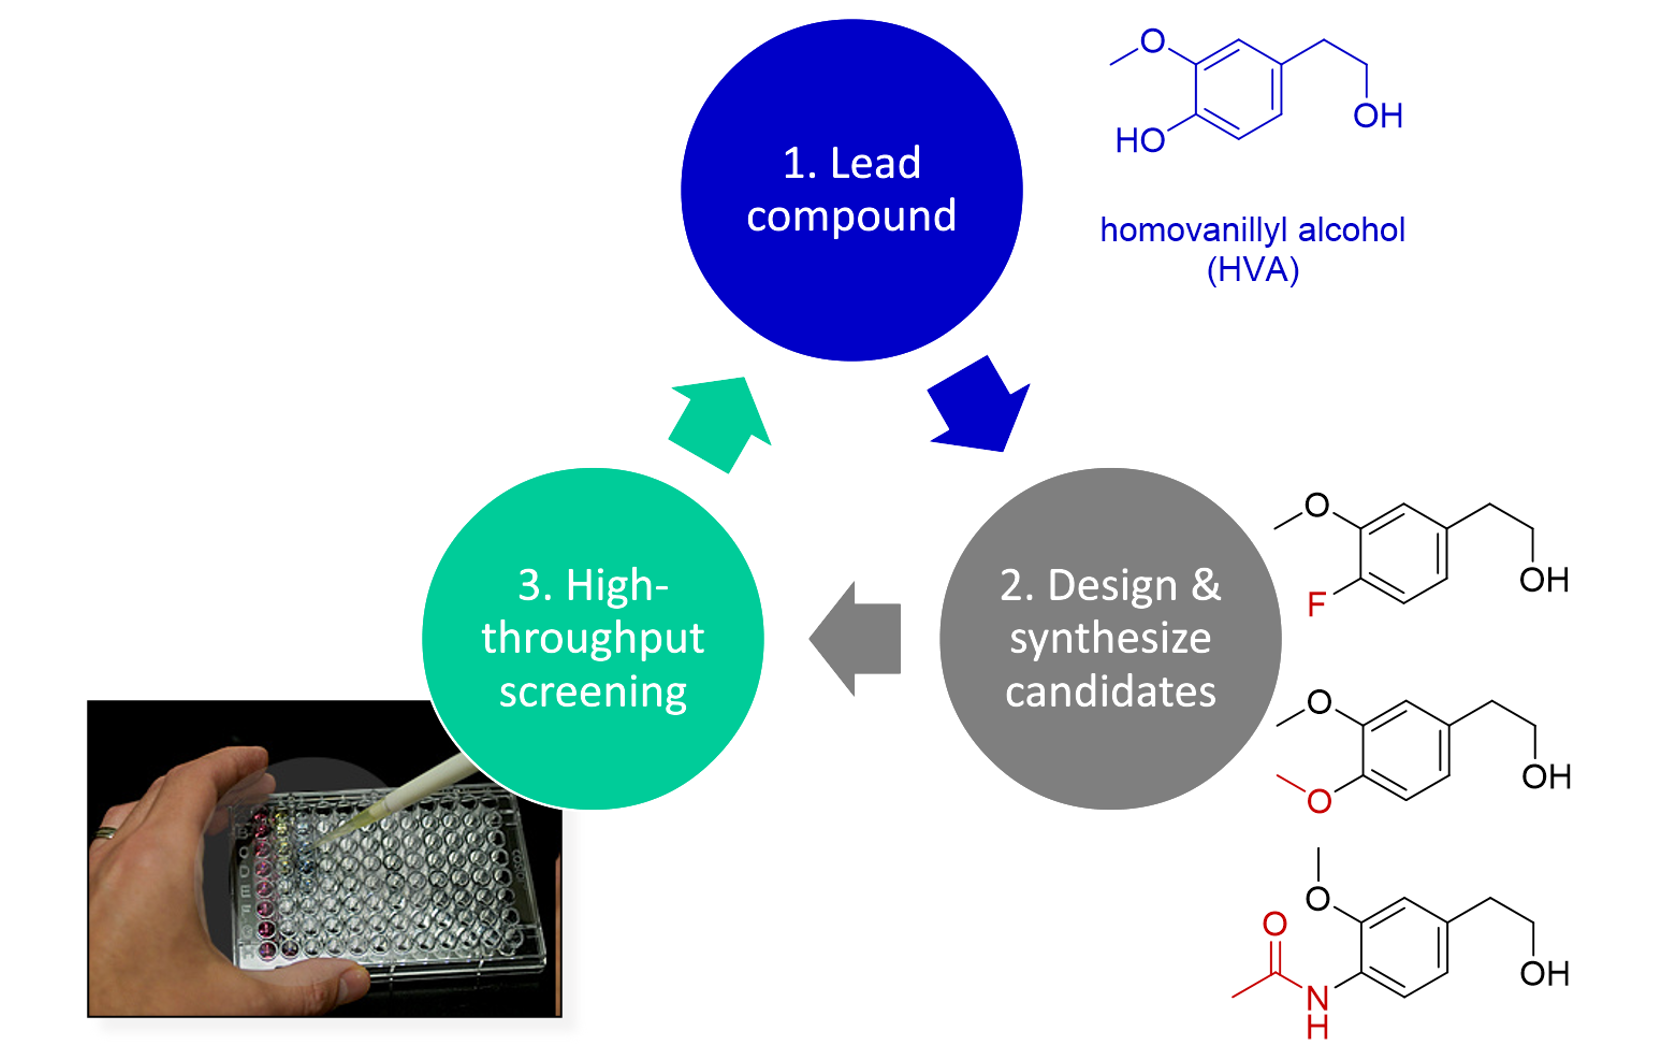 A flow chart depicting three steps: 1. Lead compound; 2. Design and synthesize candidates; 3. High-throughput screening. There are images next to each step depicting the chemicals or processes involved.